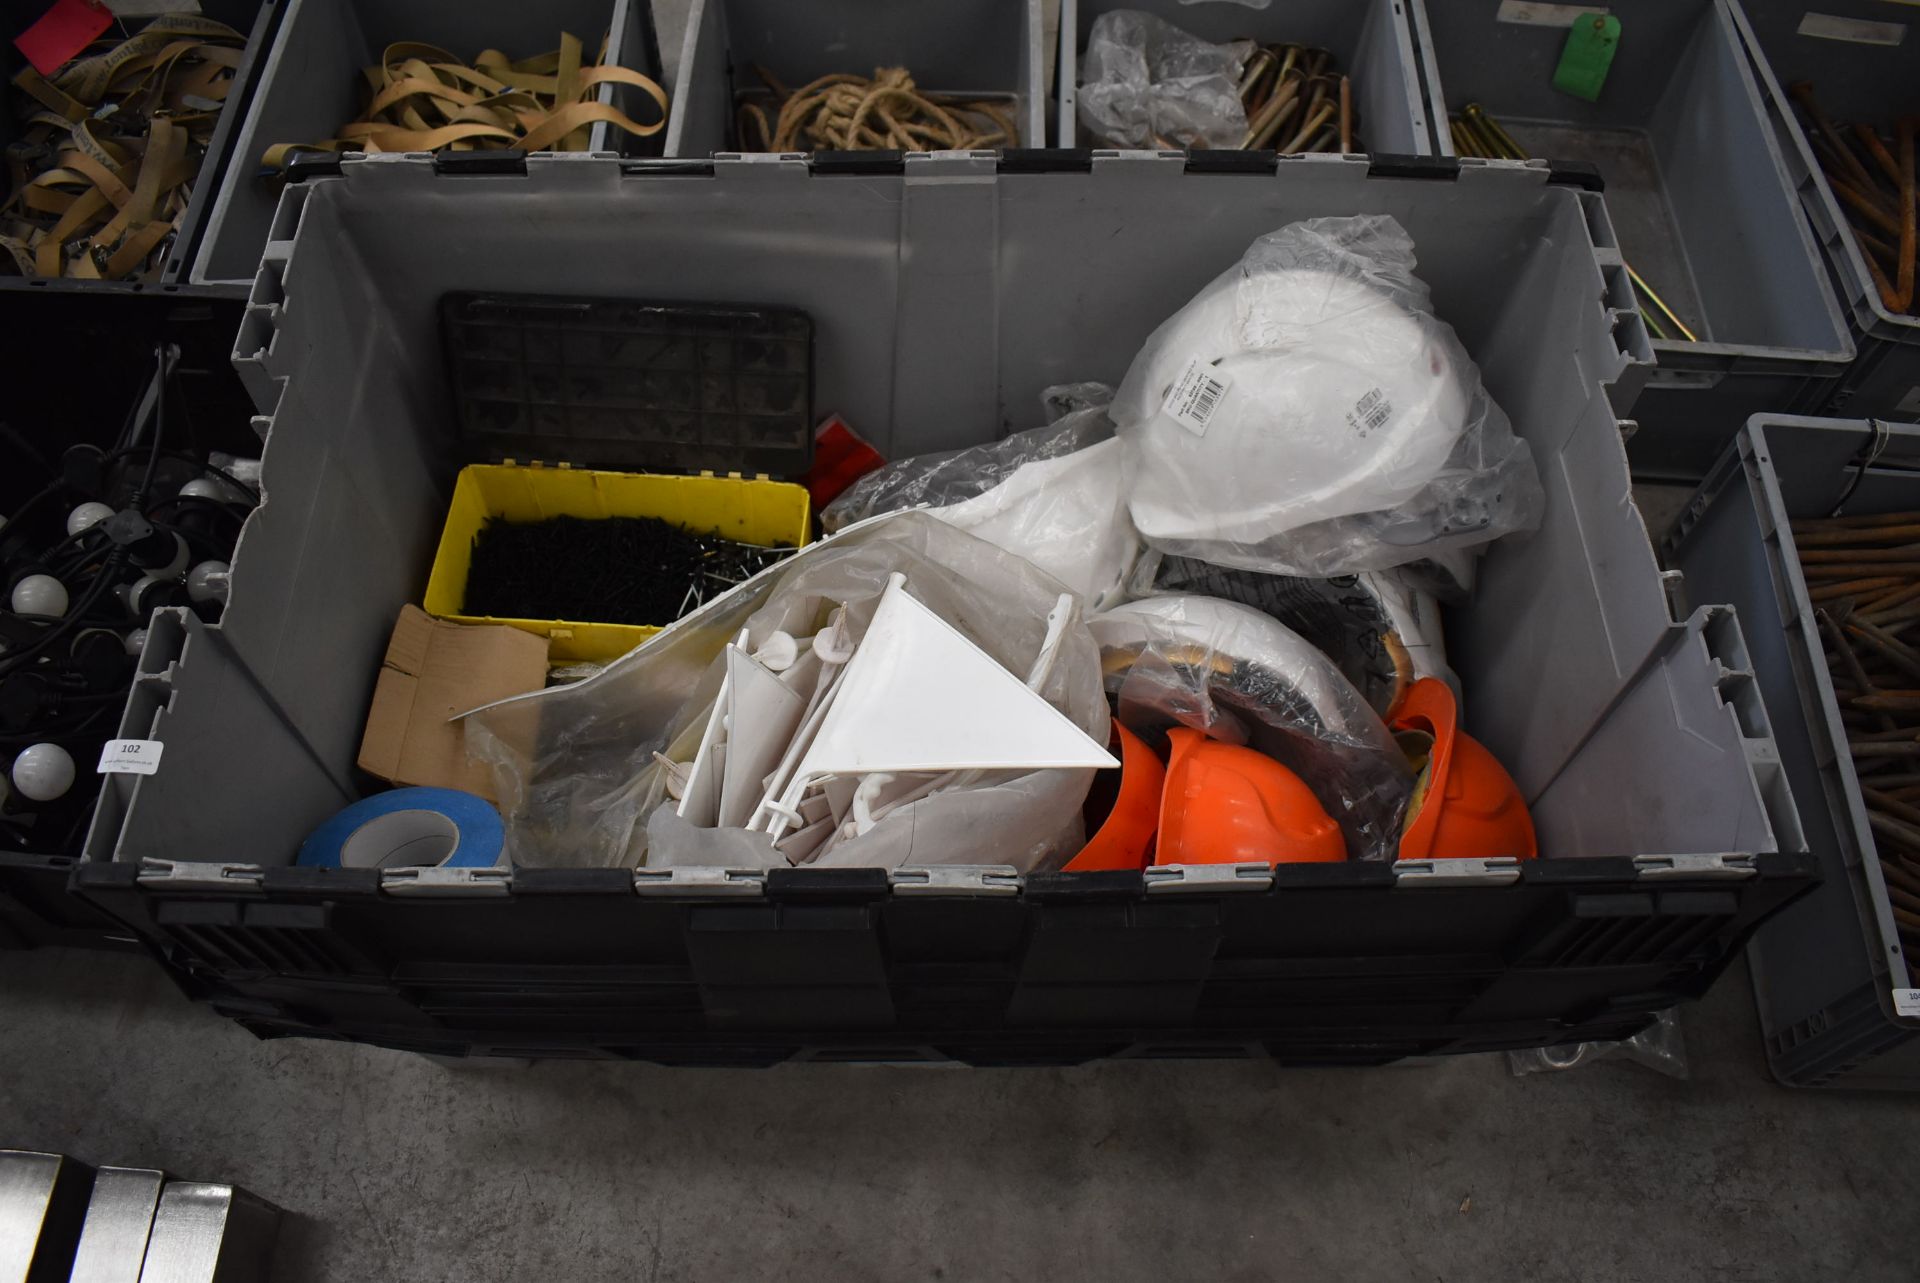 Box of Assorted Hardhats, Roofing & Dry Wall Screws, Double Sided Table, Plastic Flags, etc.